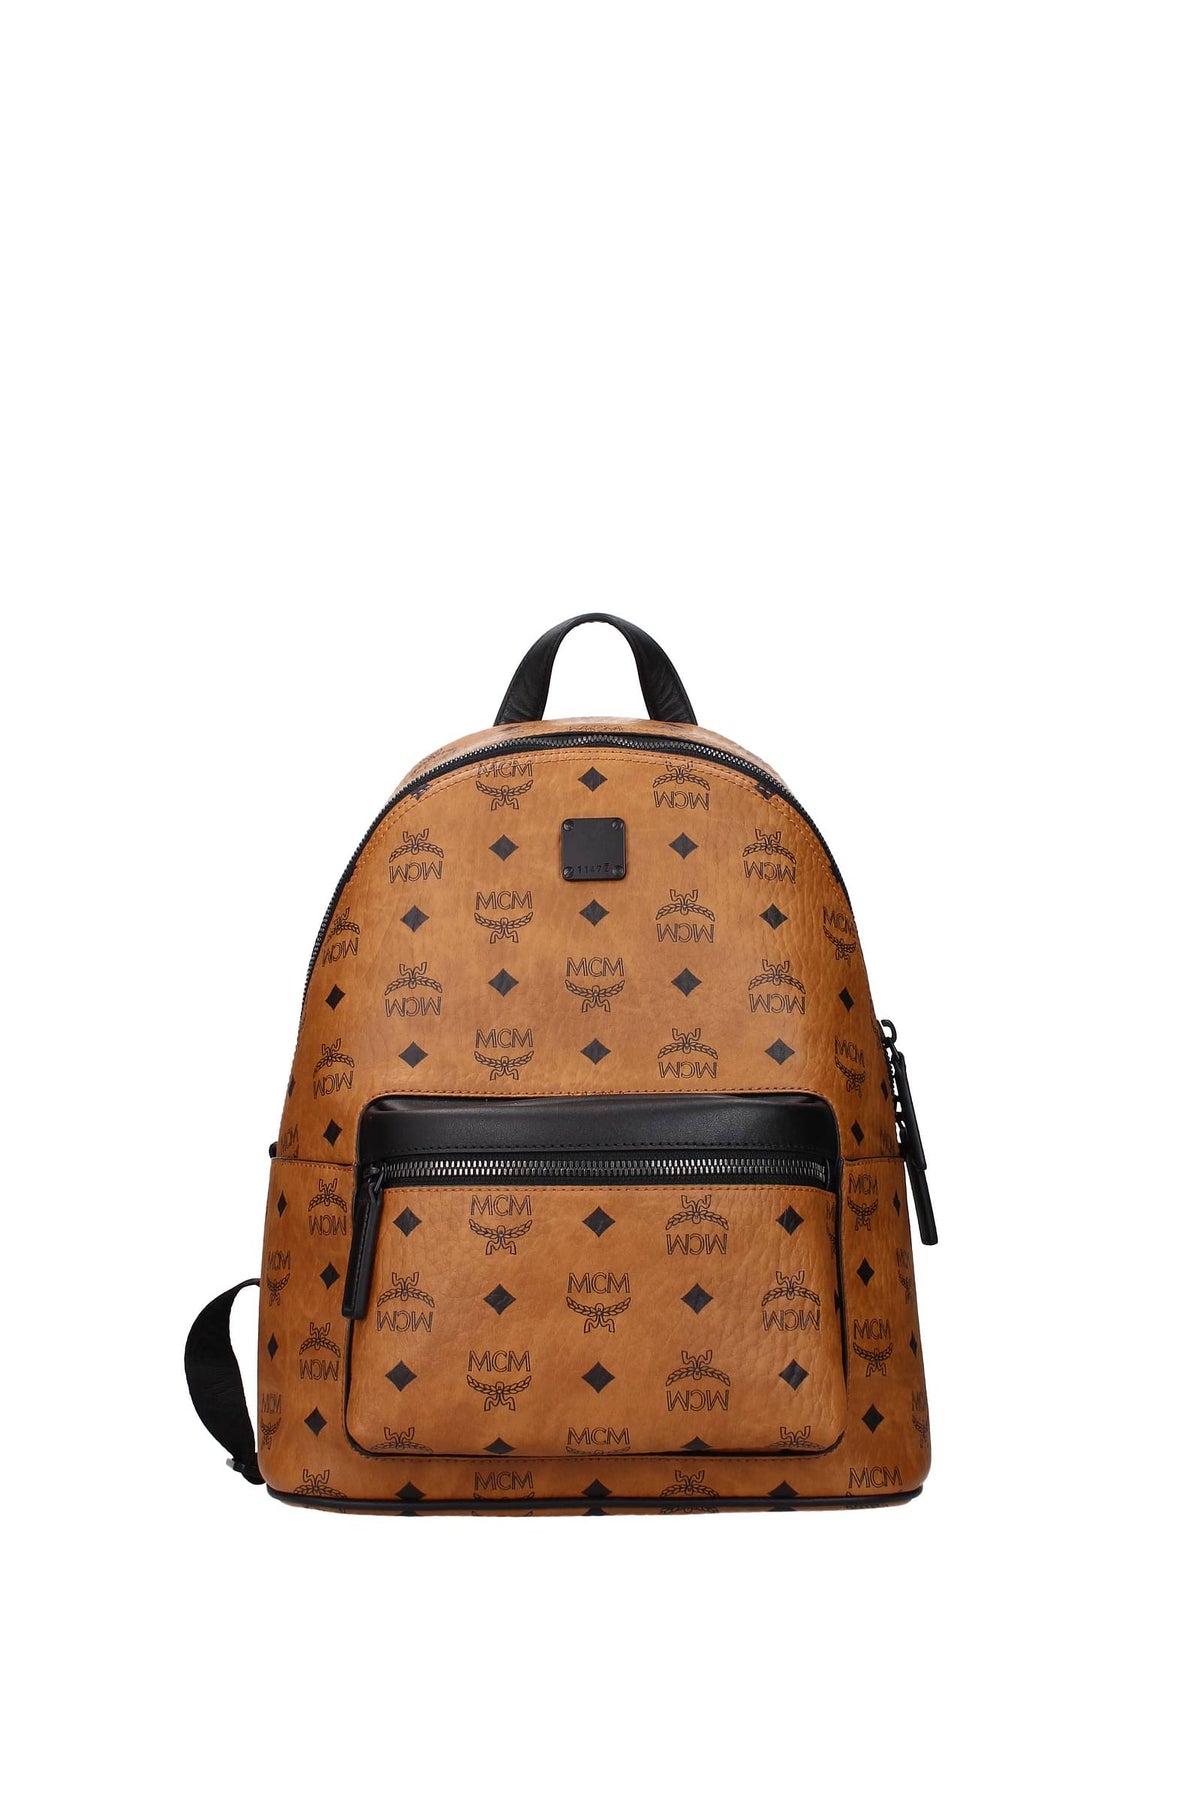 Mcm Backpack And Bumbags Leather Cognac In Brown